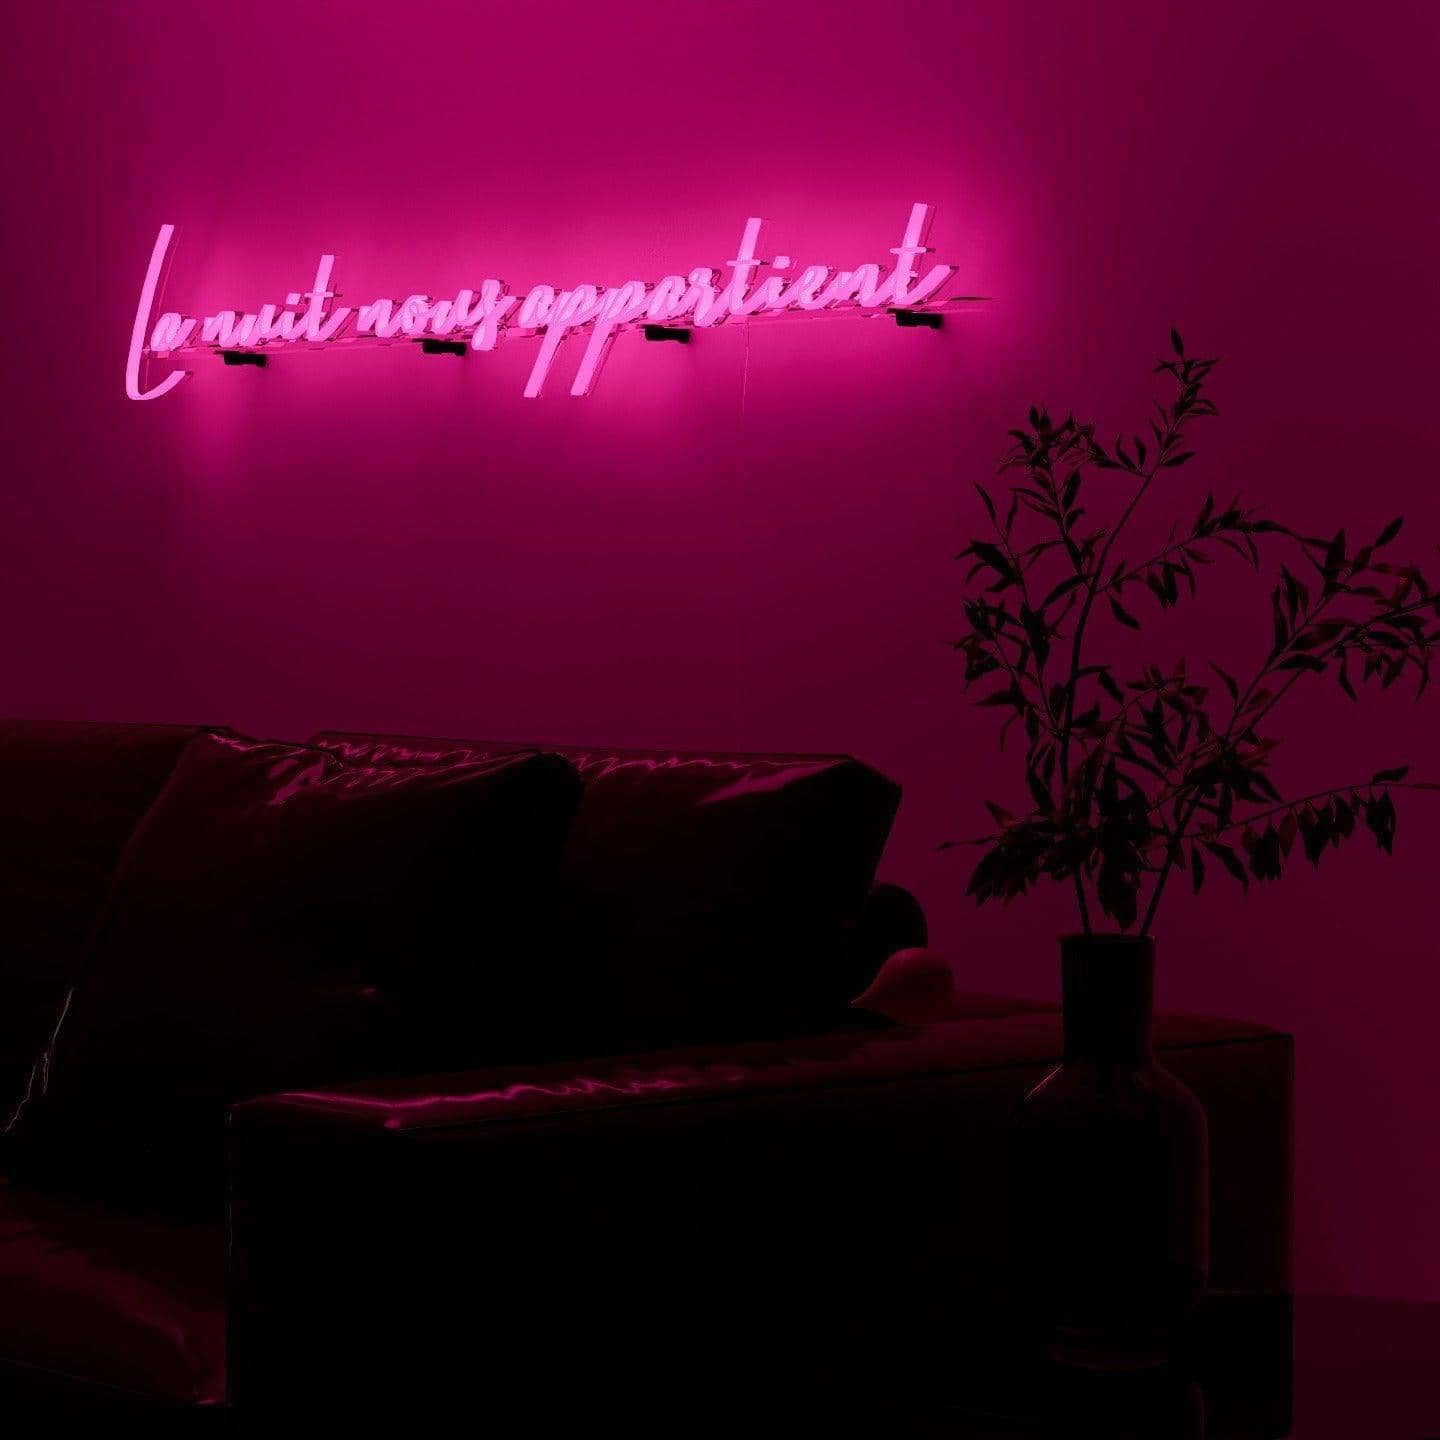 dark-night-lit-pink-neon-lights-hanging-on-the-wall-for-display-la-nuit-nous-appartient-la-nuit-nous-appartient